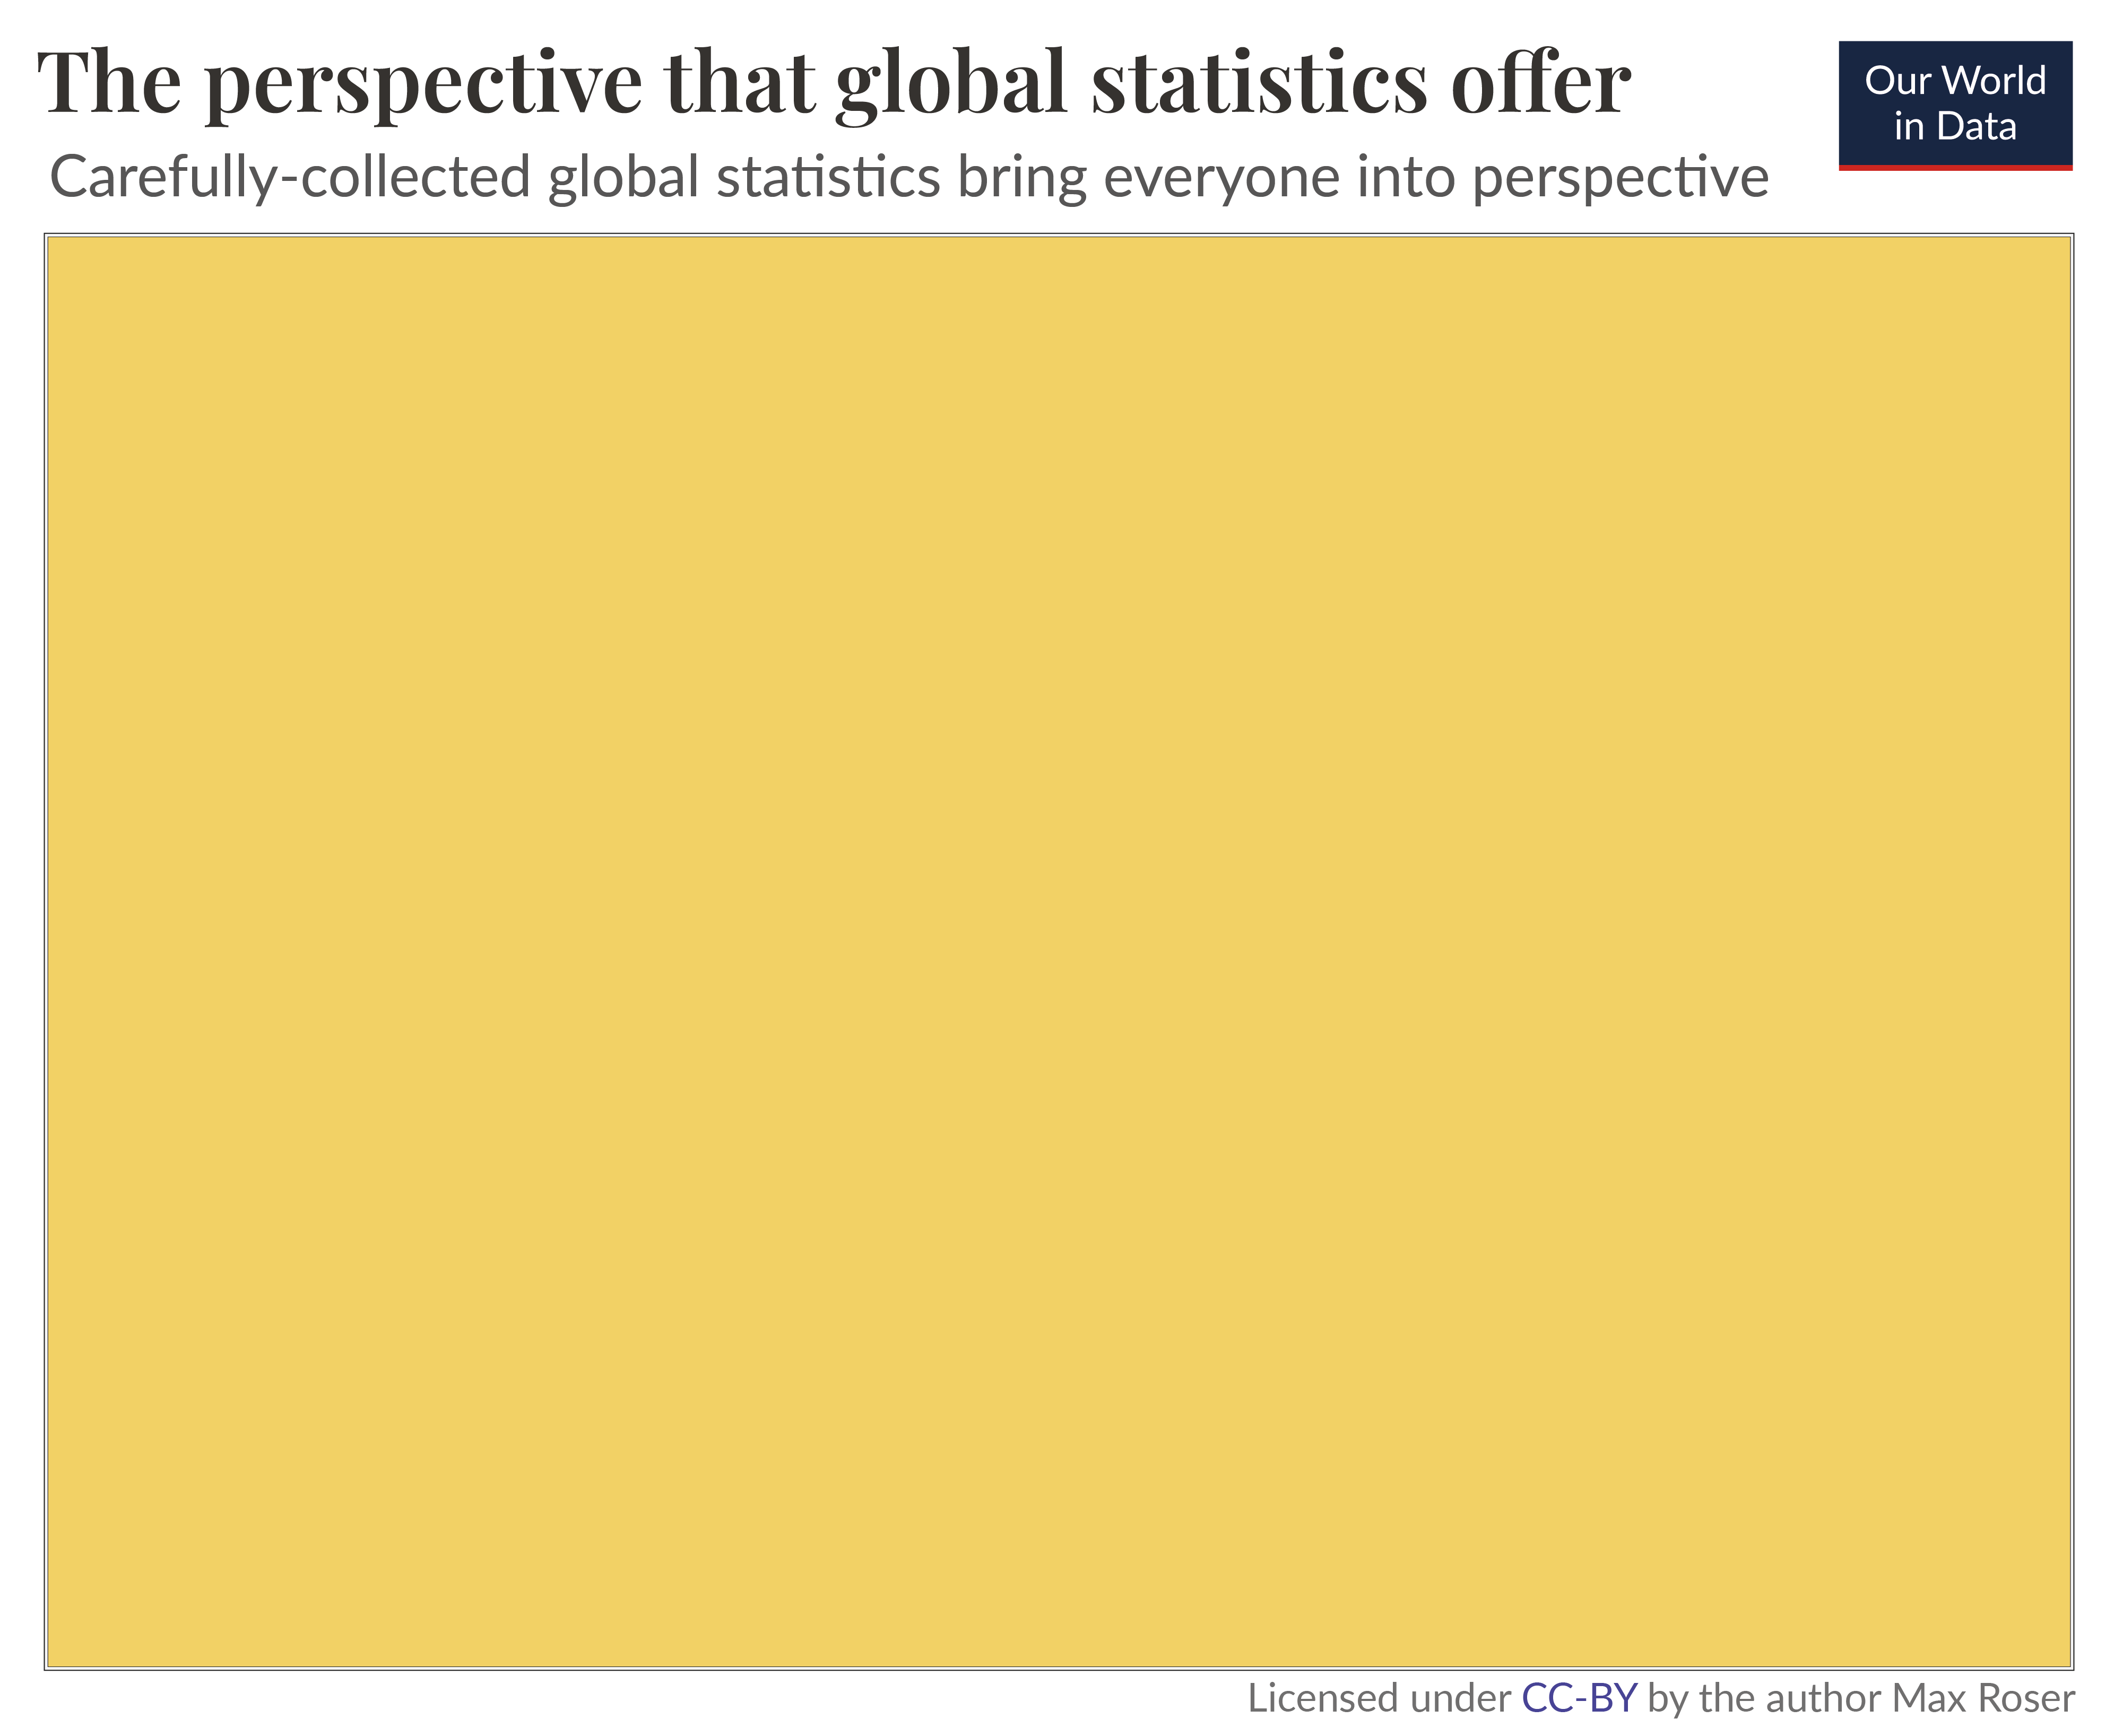 The perspective that global statistics offer – Carefully-collected global statistics bring everyone into perspective